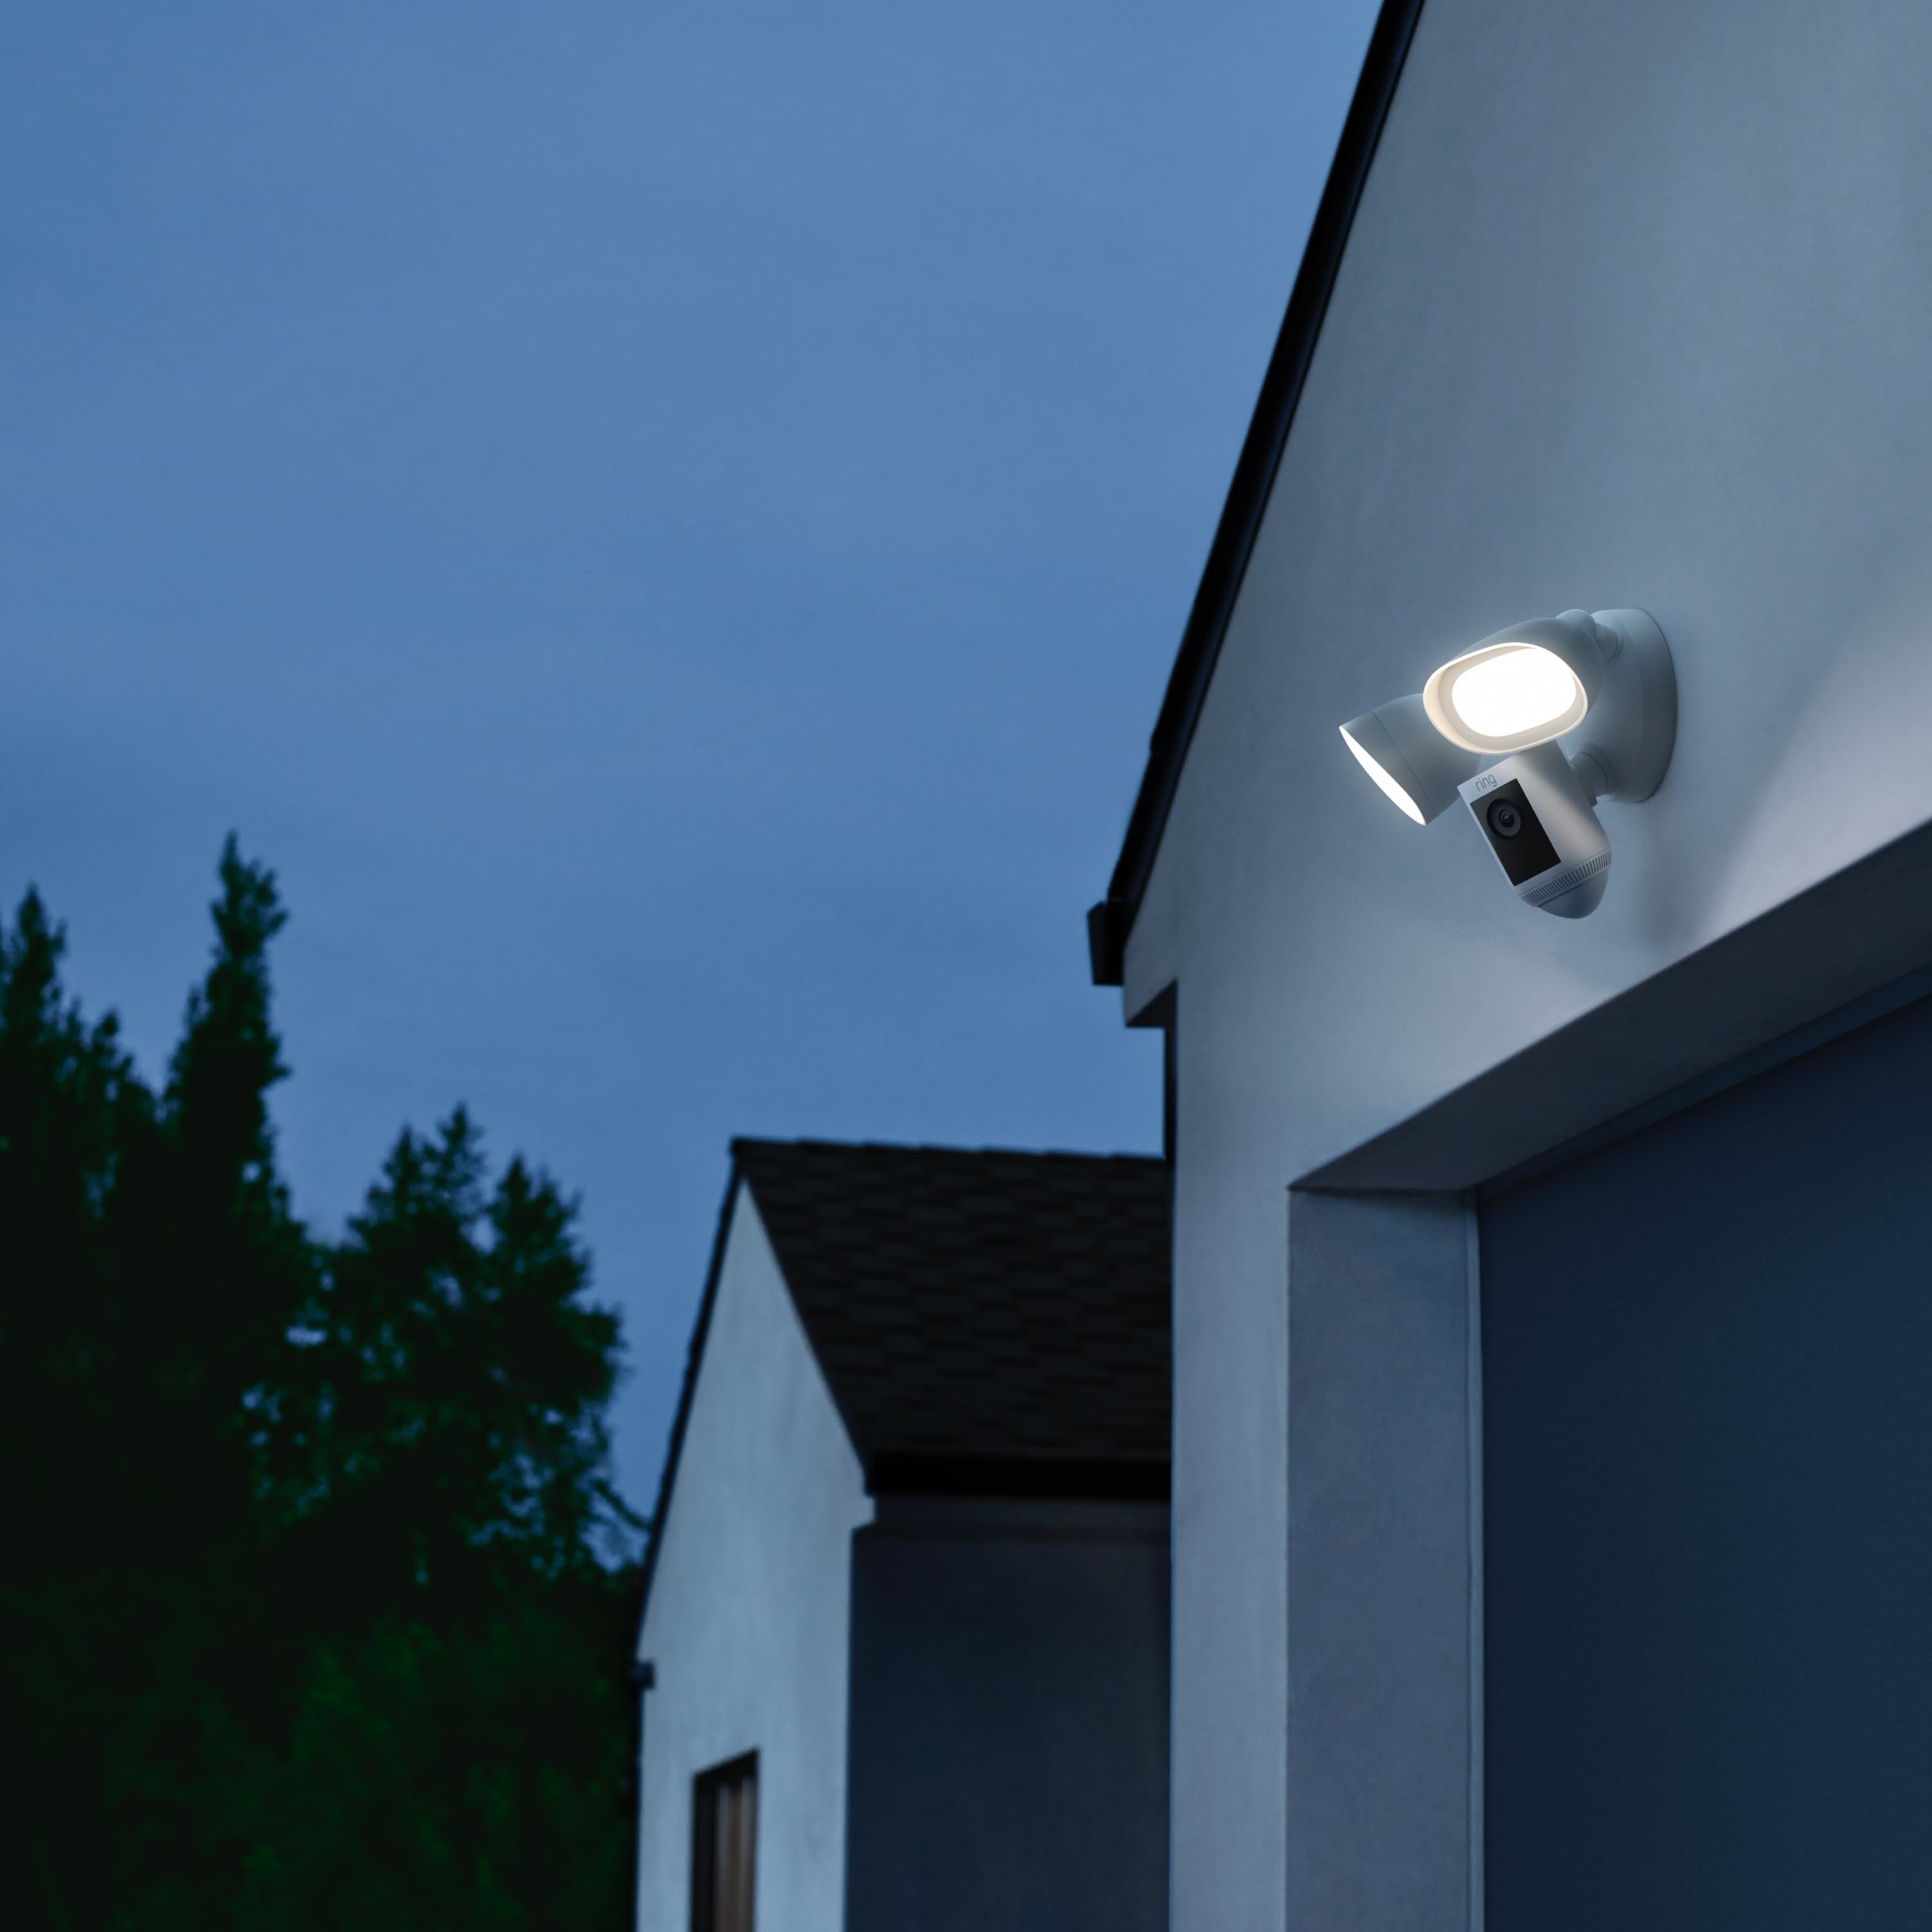 Connected Deluxe Kit (Wired Doorbell Pro (Video Doorbell Pro 2) + Floodlight Cam Wired Pro) - Outdoors at night, Floodlight Cam Wired Pro is shown mounted above garage door with both lights on.